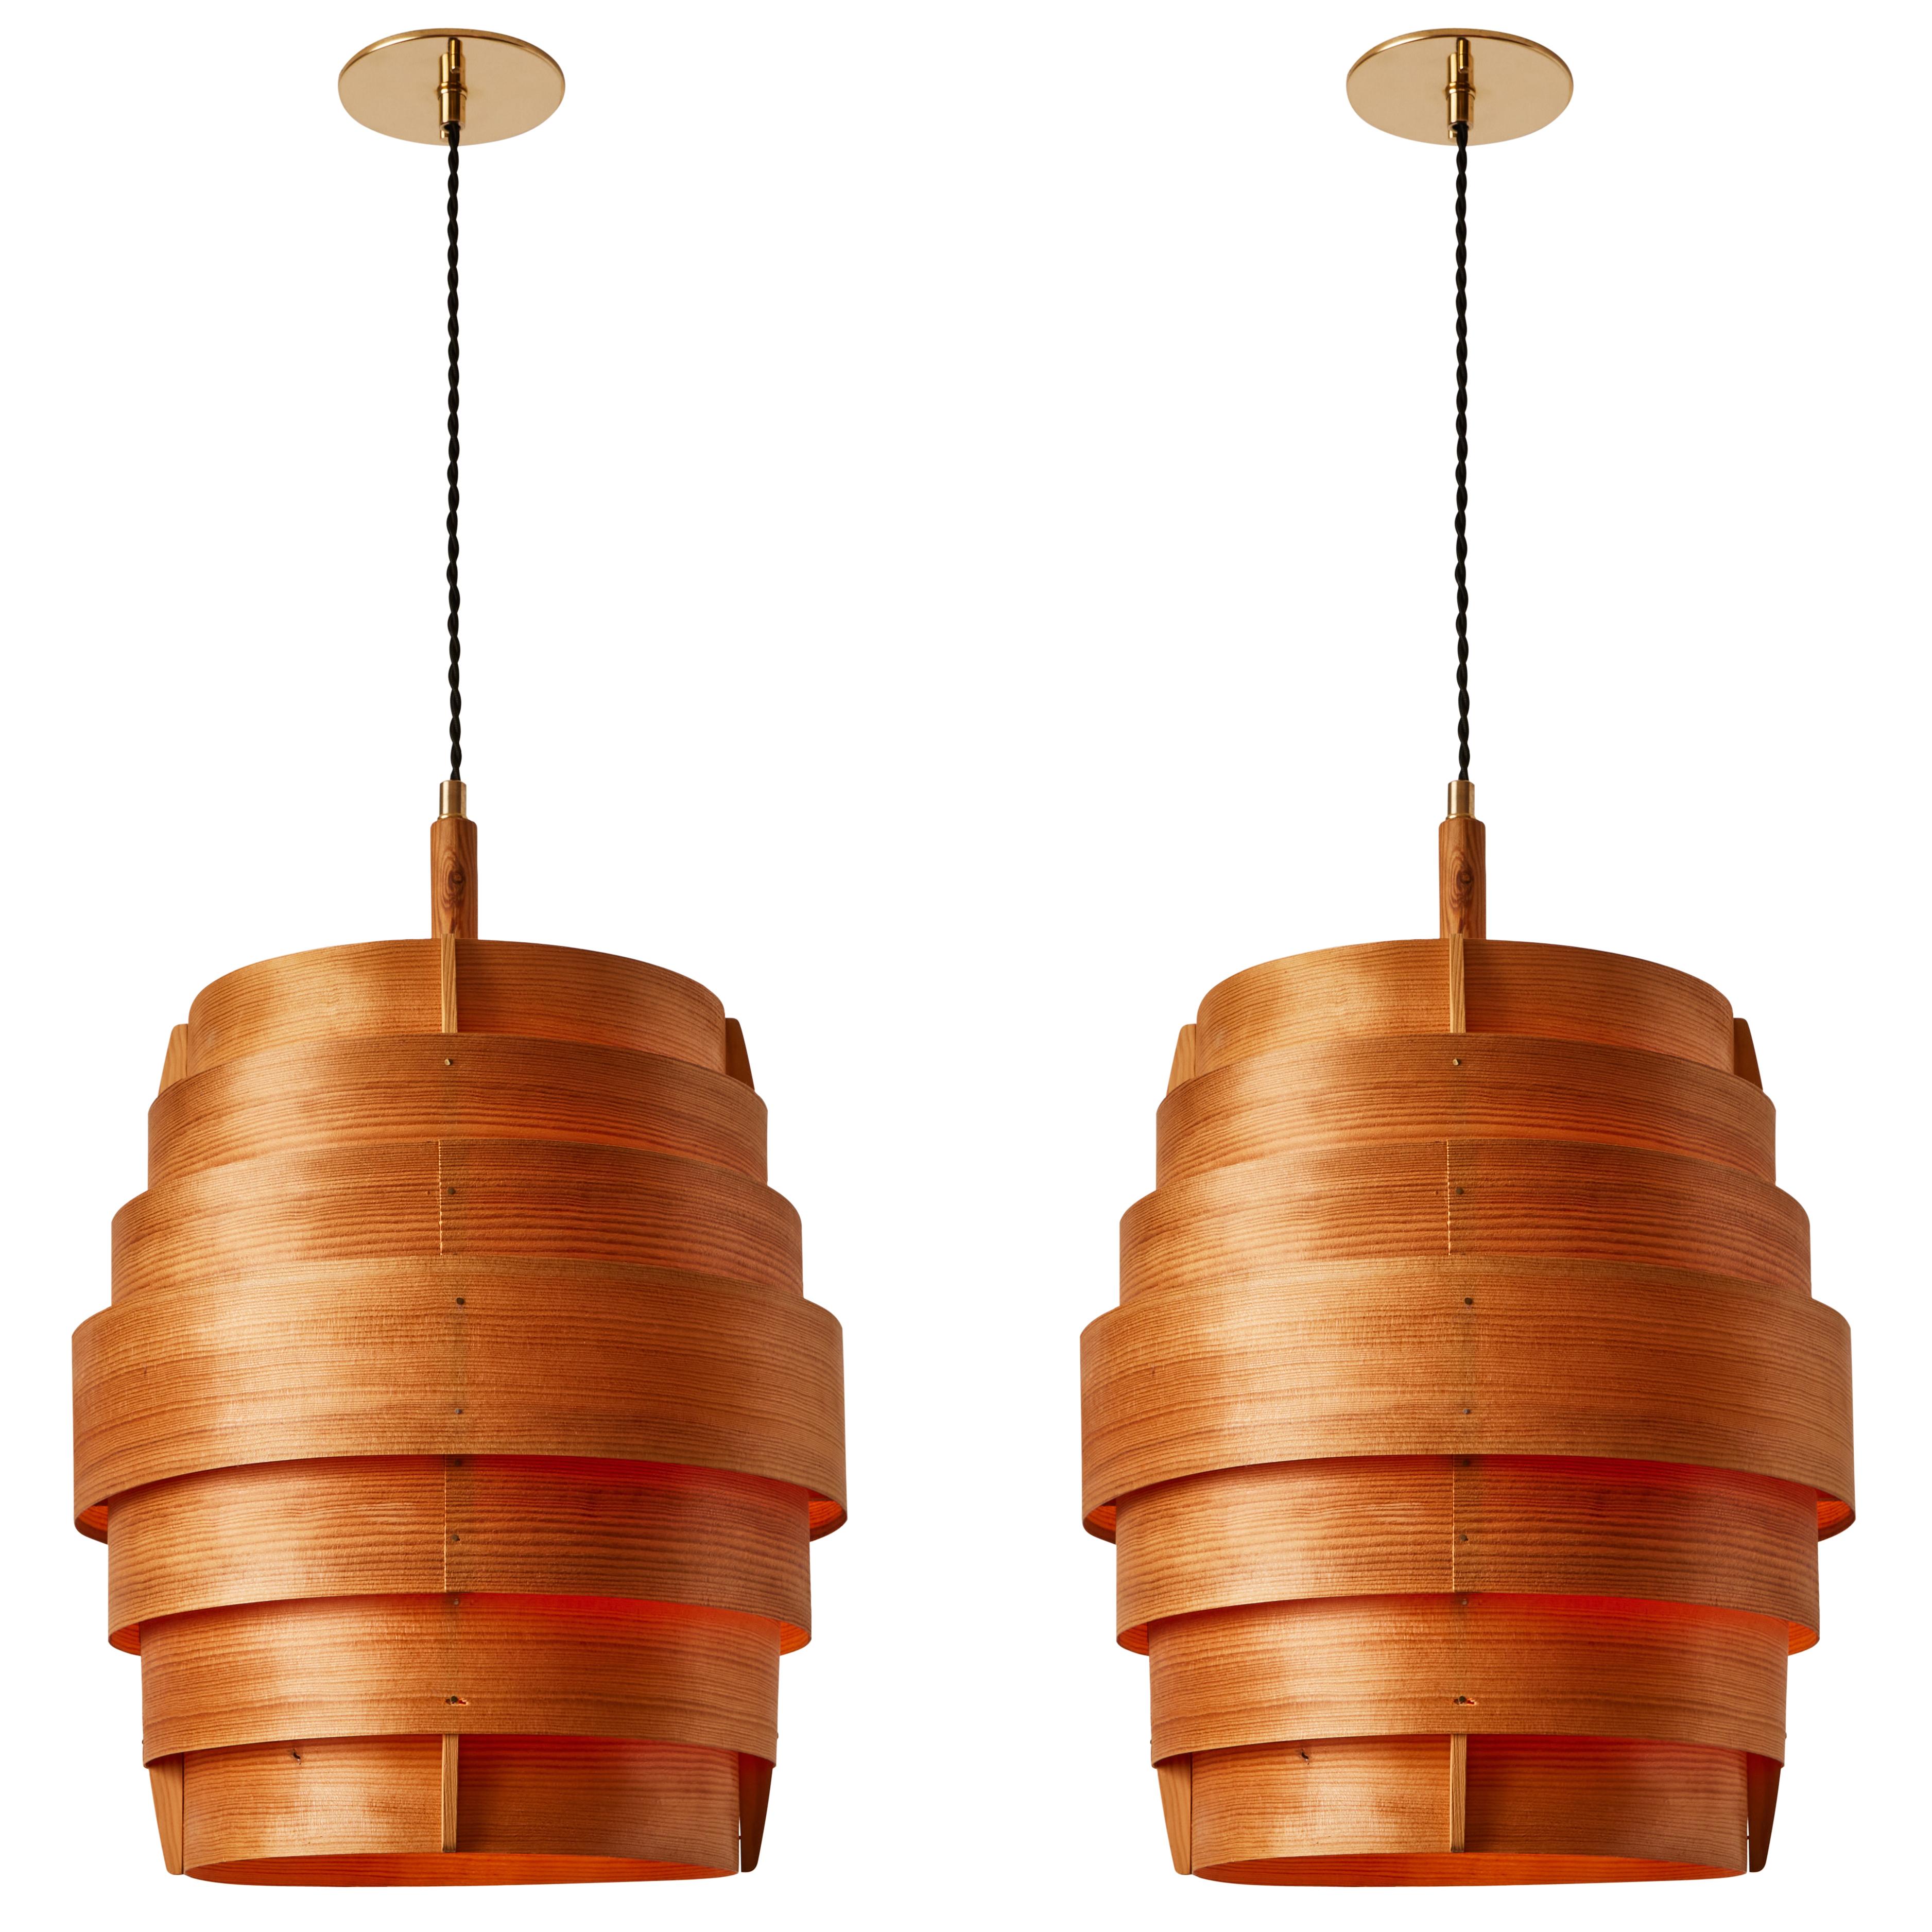 Large 1960s Hans-Agne Jakobsson Geometric Bentwood Pendant for AB Ellysett Designed and produced by Jakobsson in Markaryd, Sweden and executed in thin bentwood with custom cloth cord and thick polished brass canopies for US electrical. A uniquely